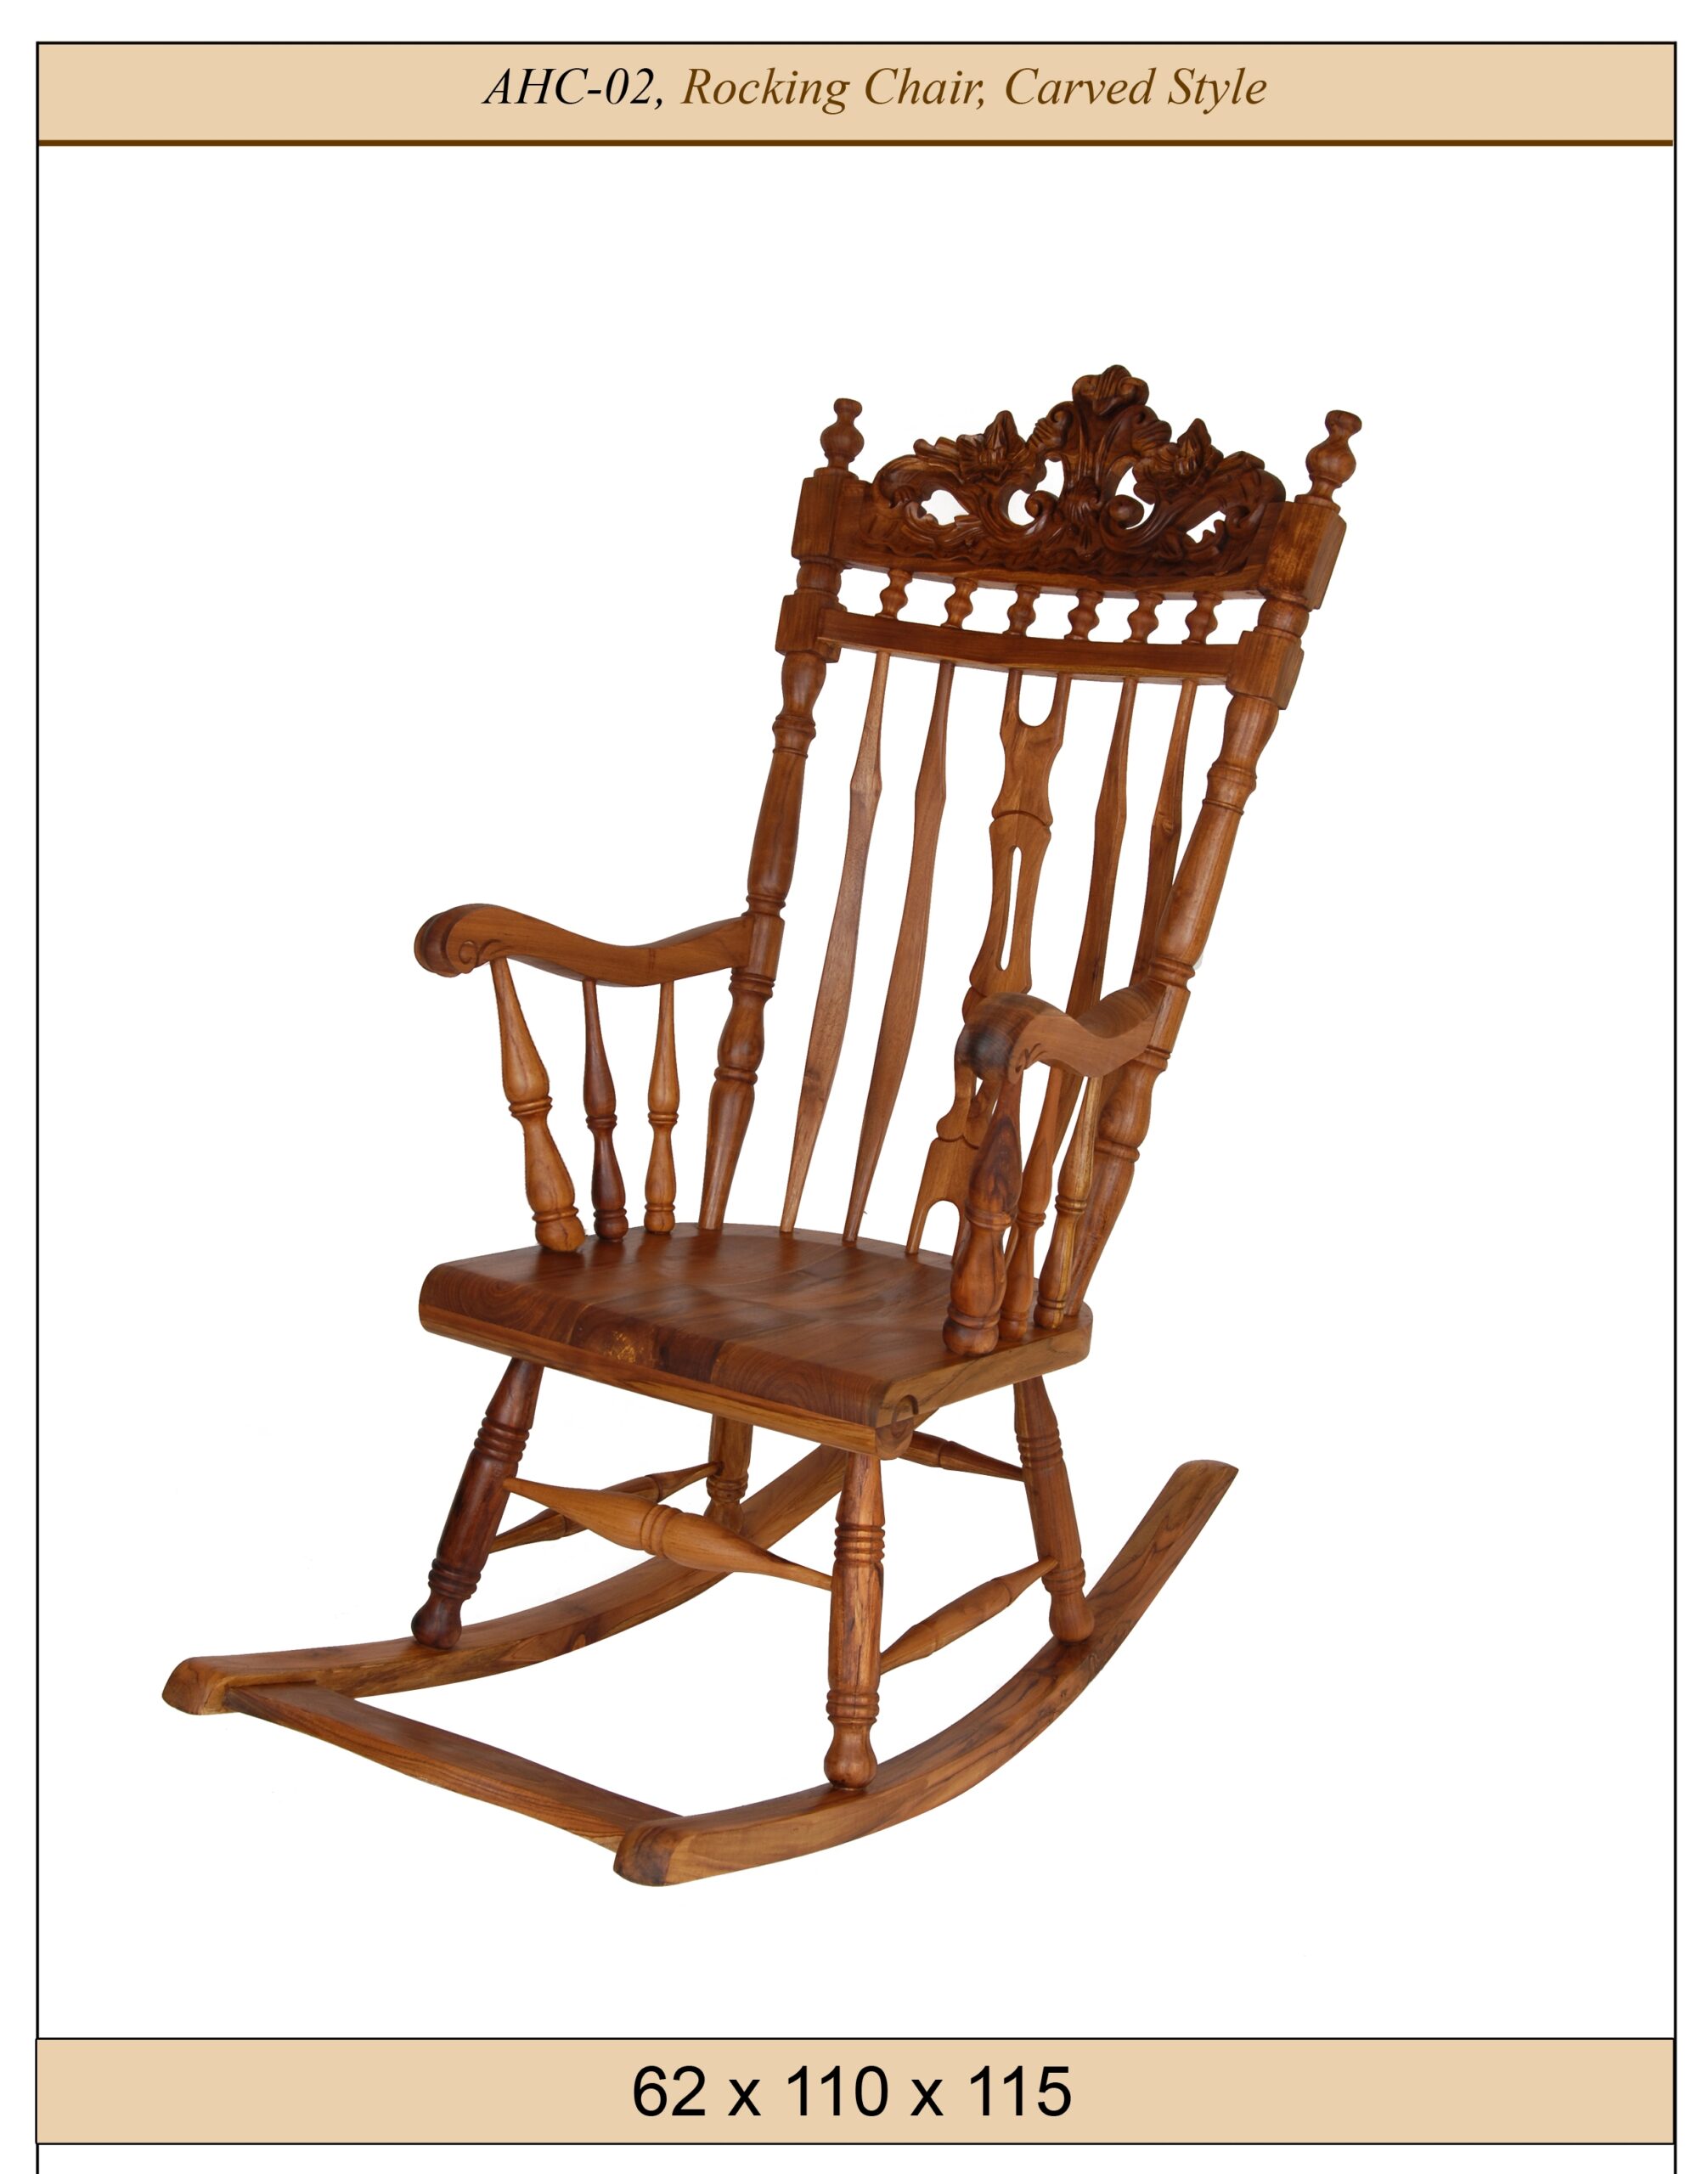  Rocking Chair, Carved